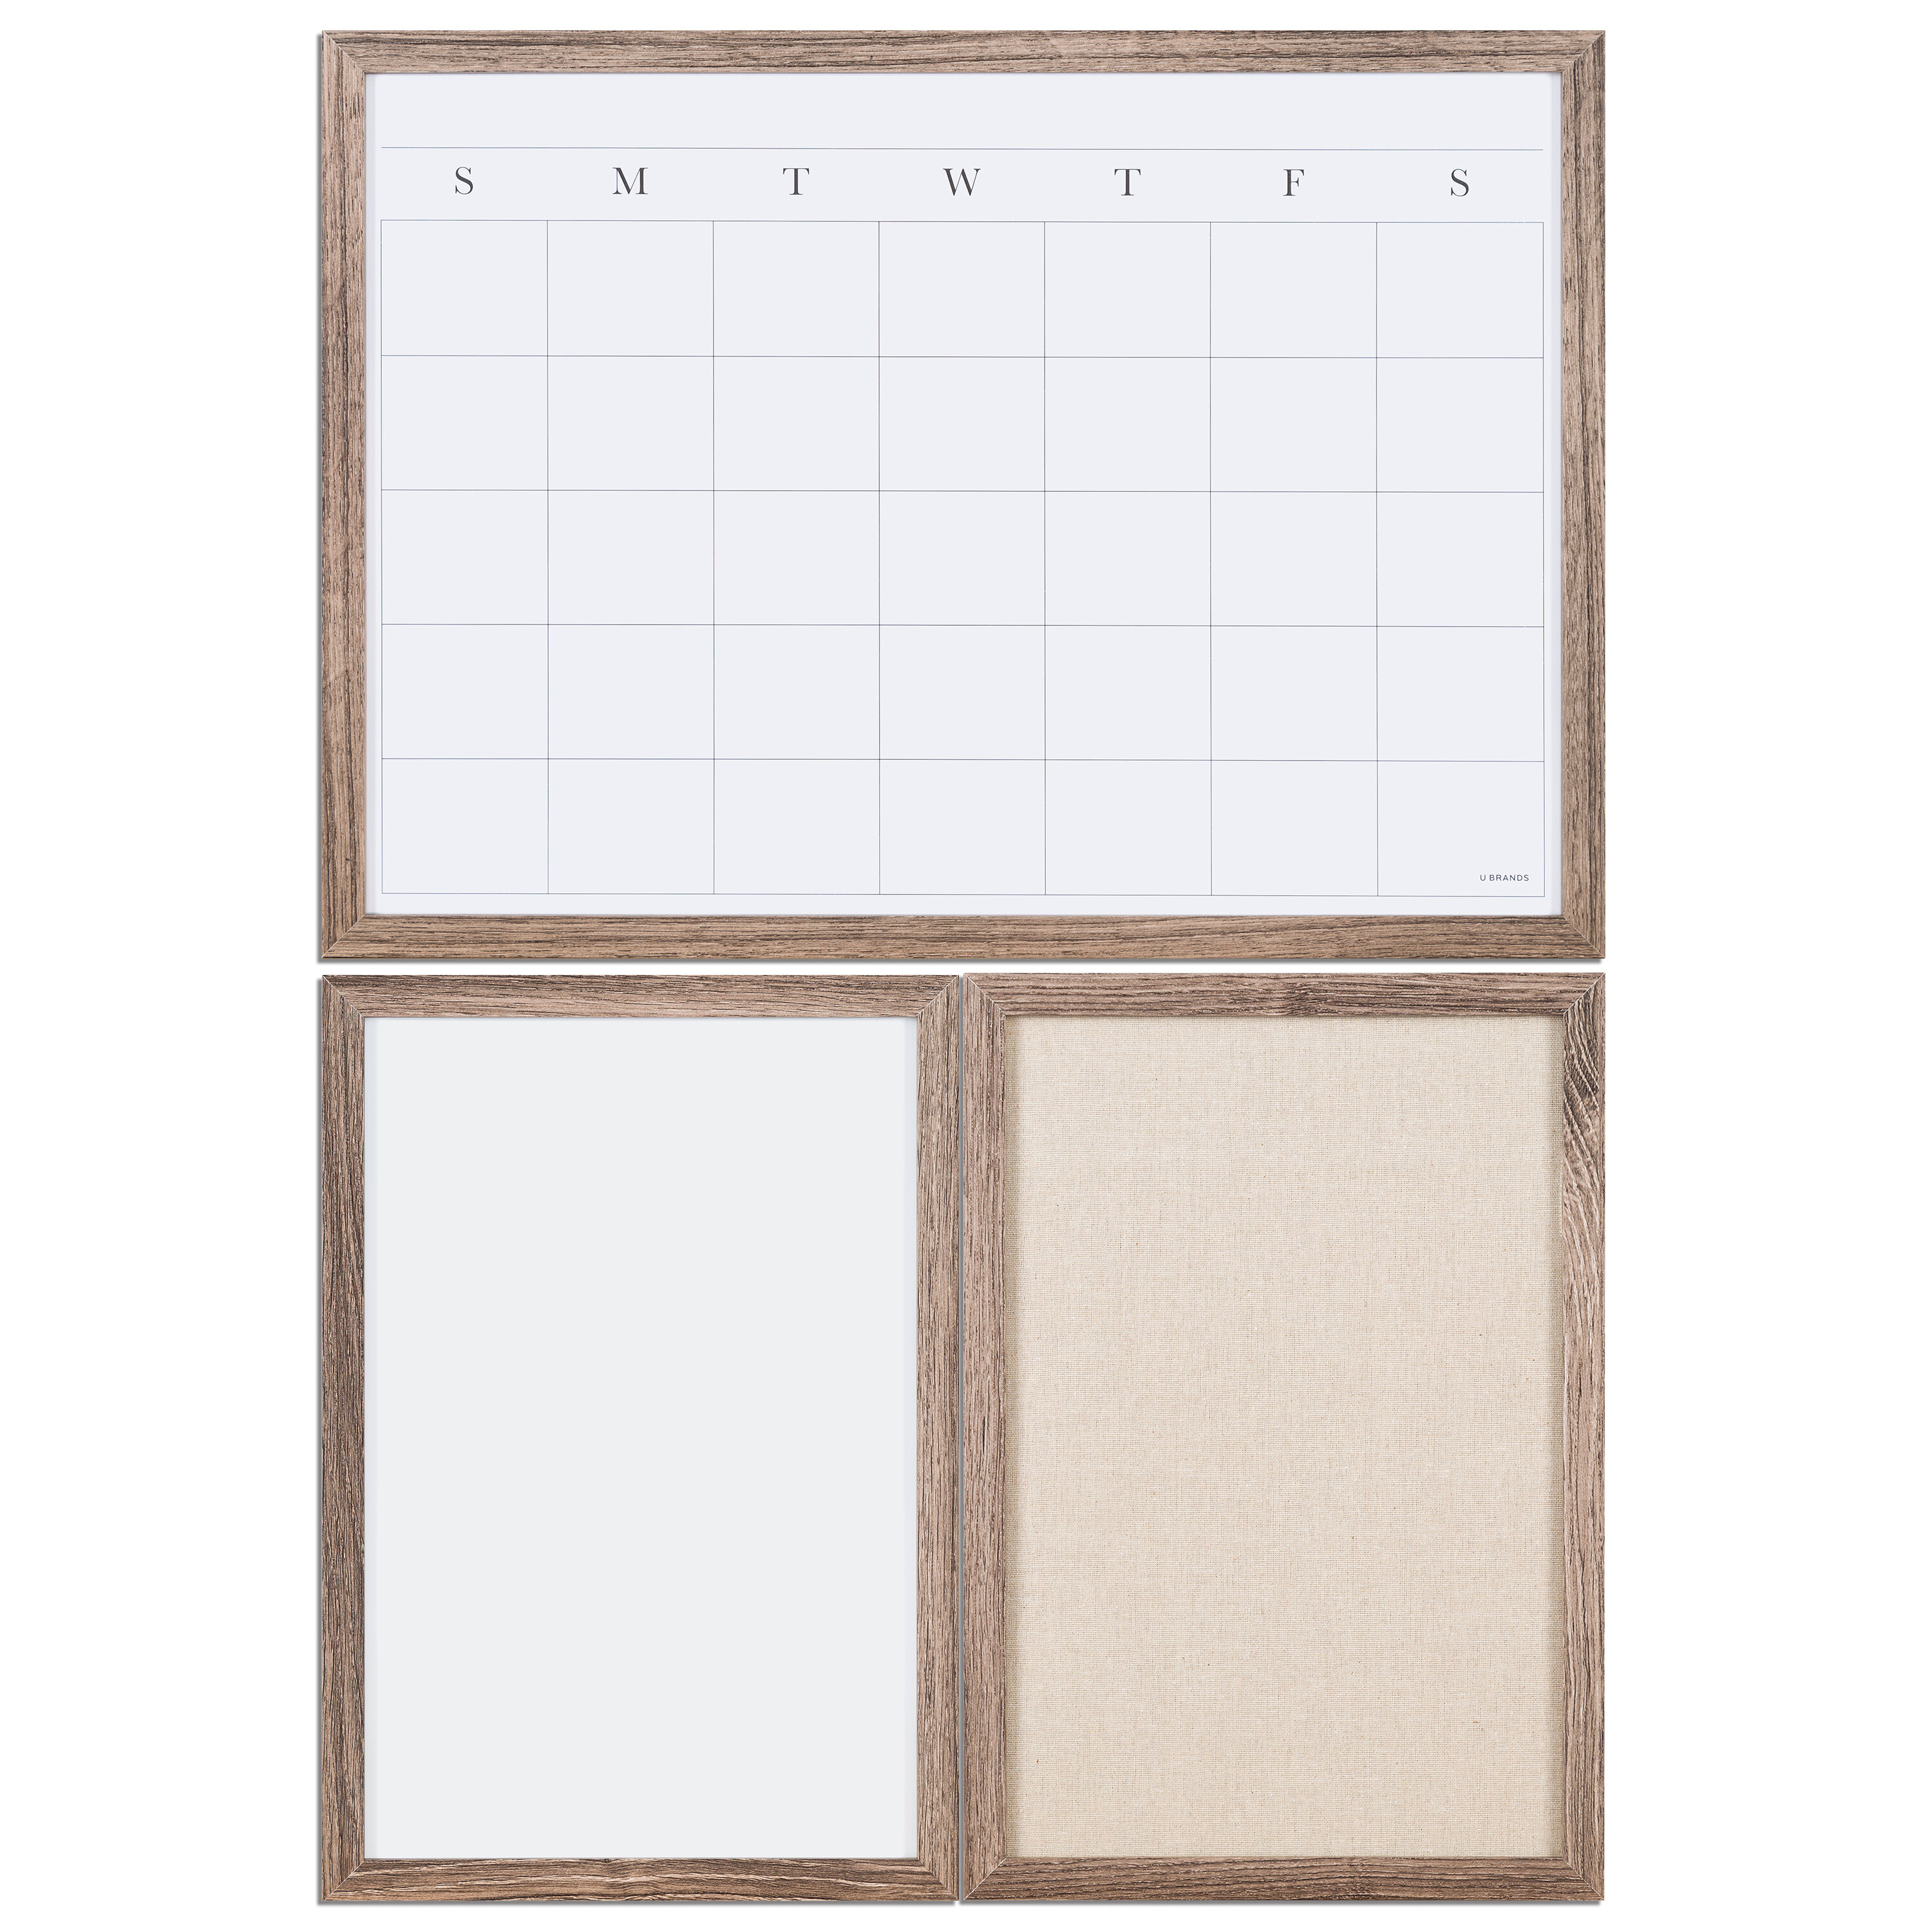 Dry Erase Cork Board Combo Maic White W Bulletin & Rustic Wooden Frame for Home for sale online 